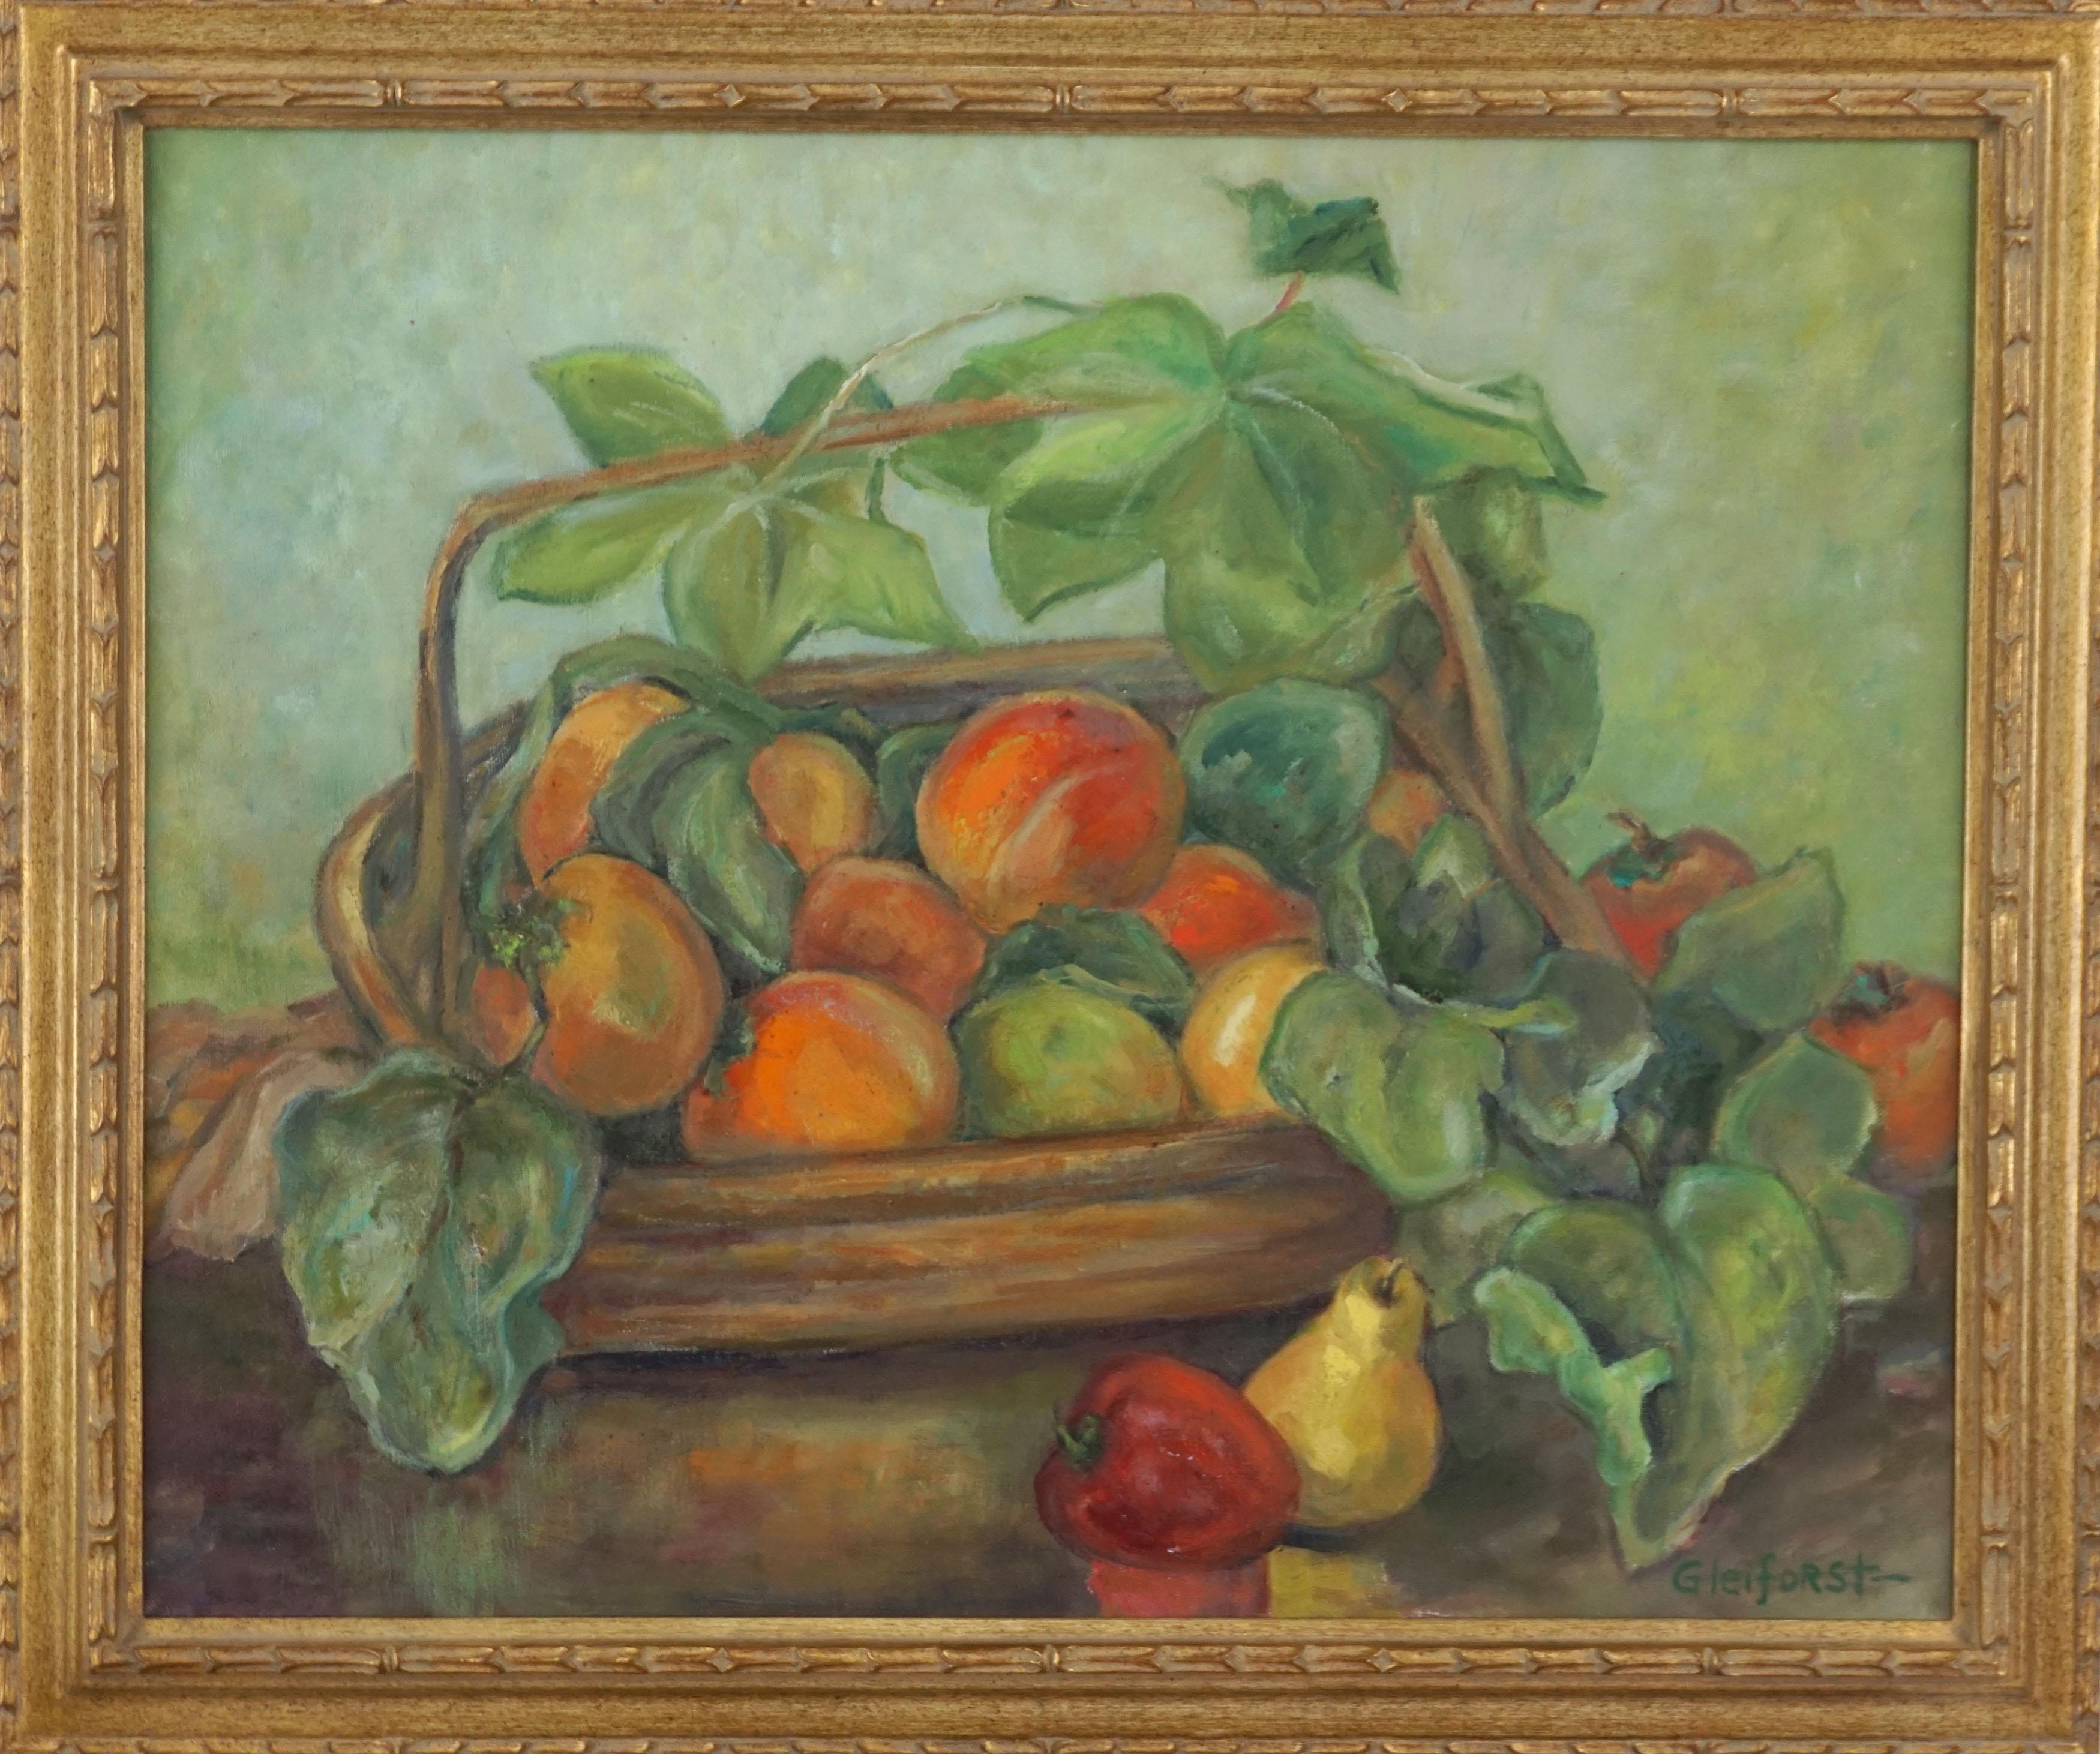 Mid Century Peaches and Pears Basket Still Life - Painting by Helen Enoch Gleiforst